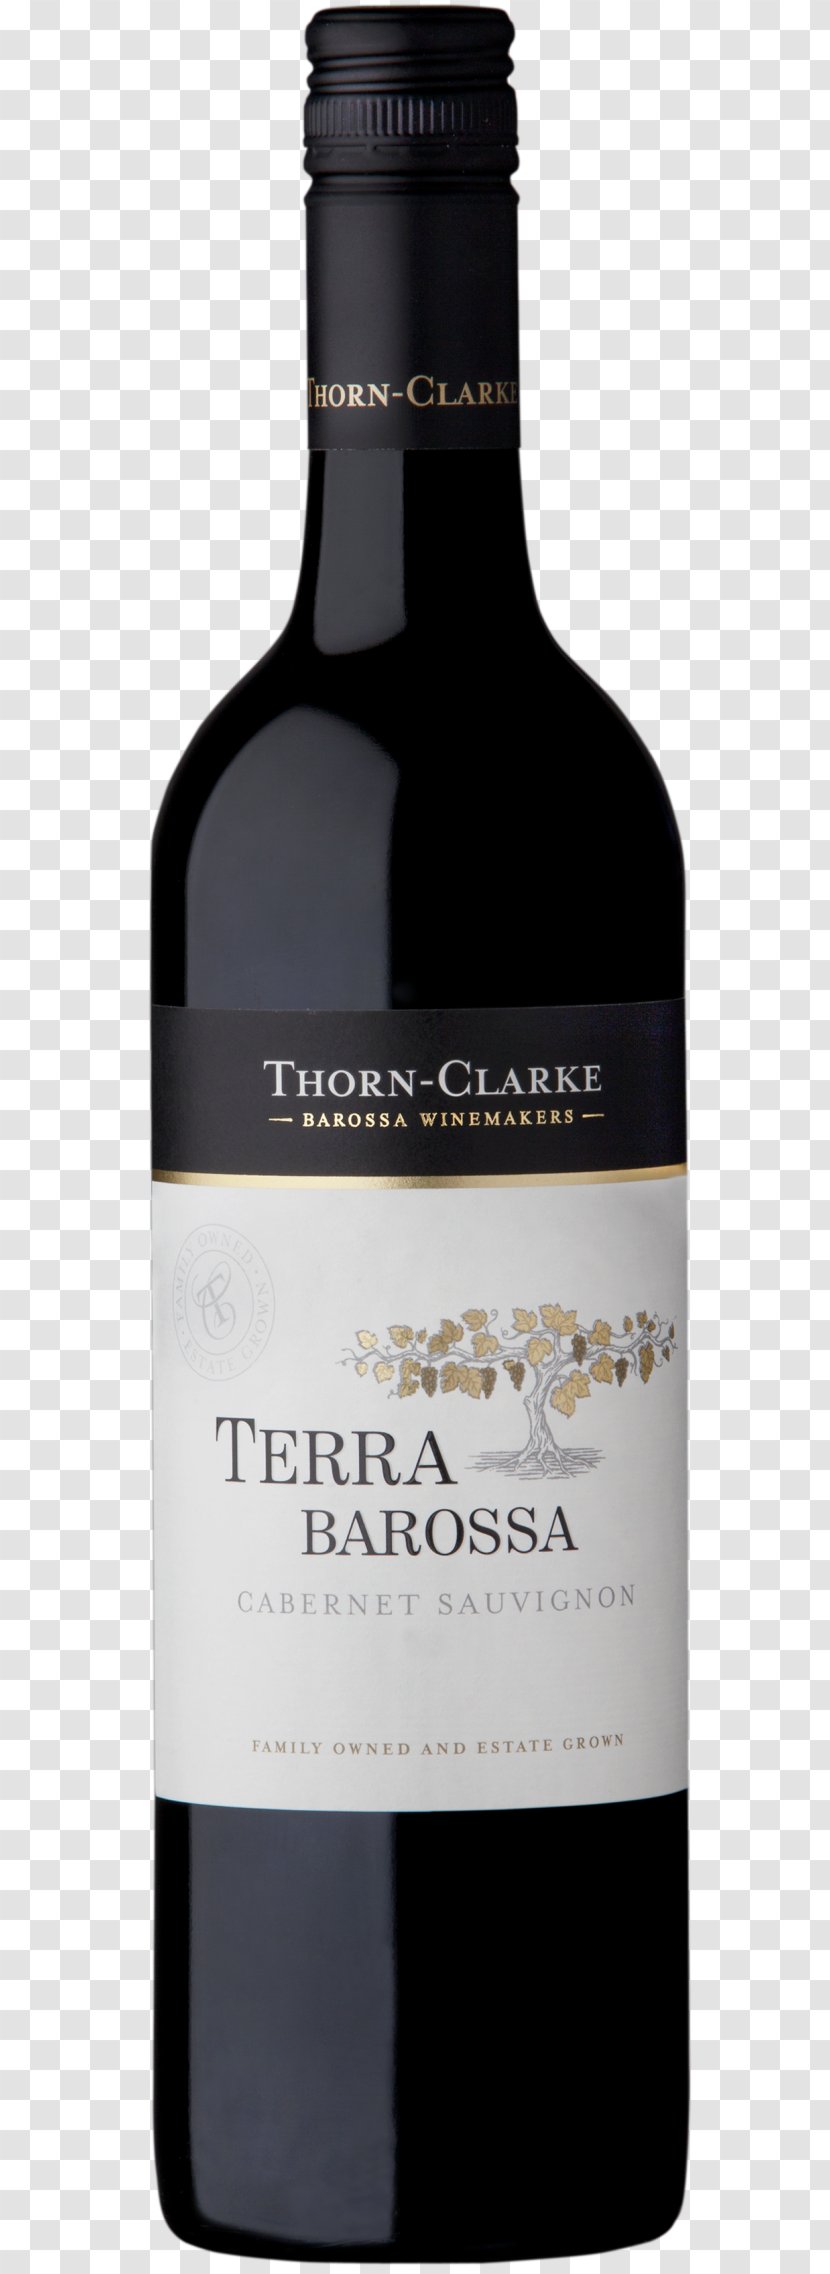 Thorn-Clarke Wines Shiraz Barossa Valley Cabernet Sauvignon - Fortified Wine Transparent PNG